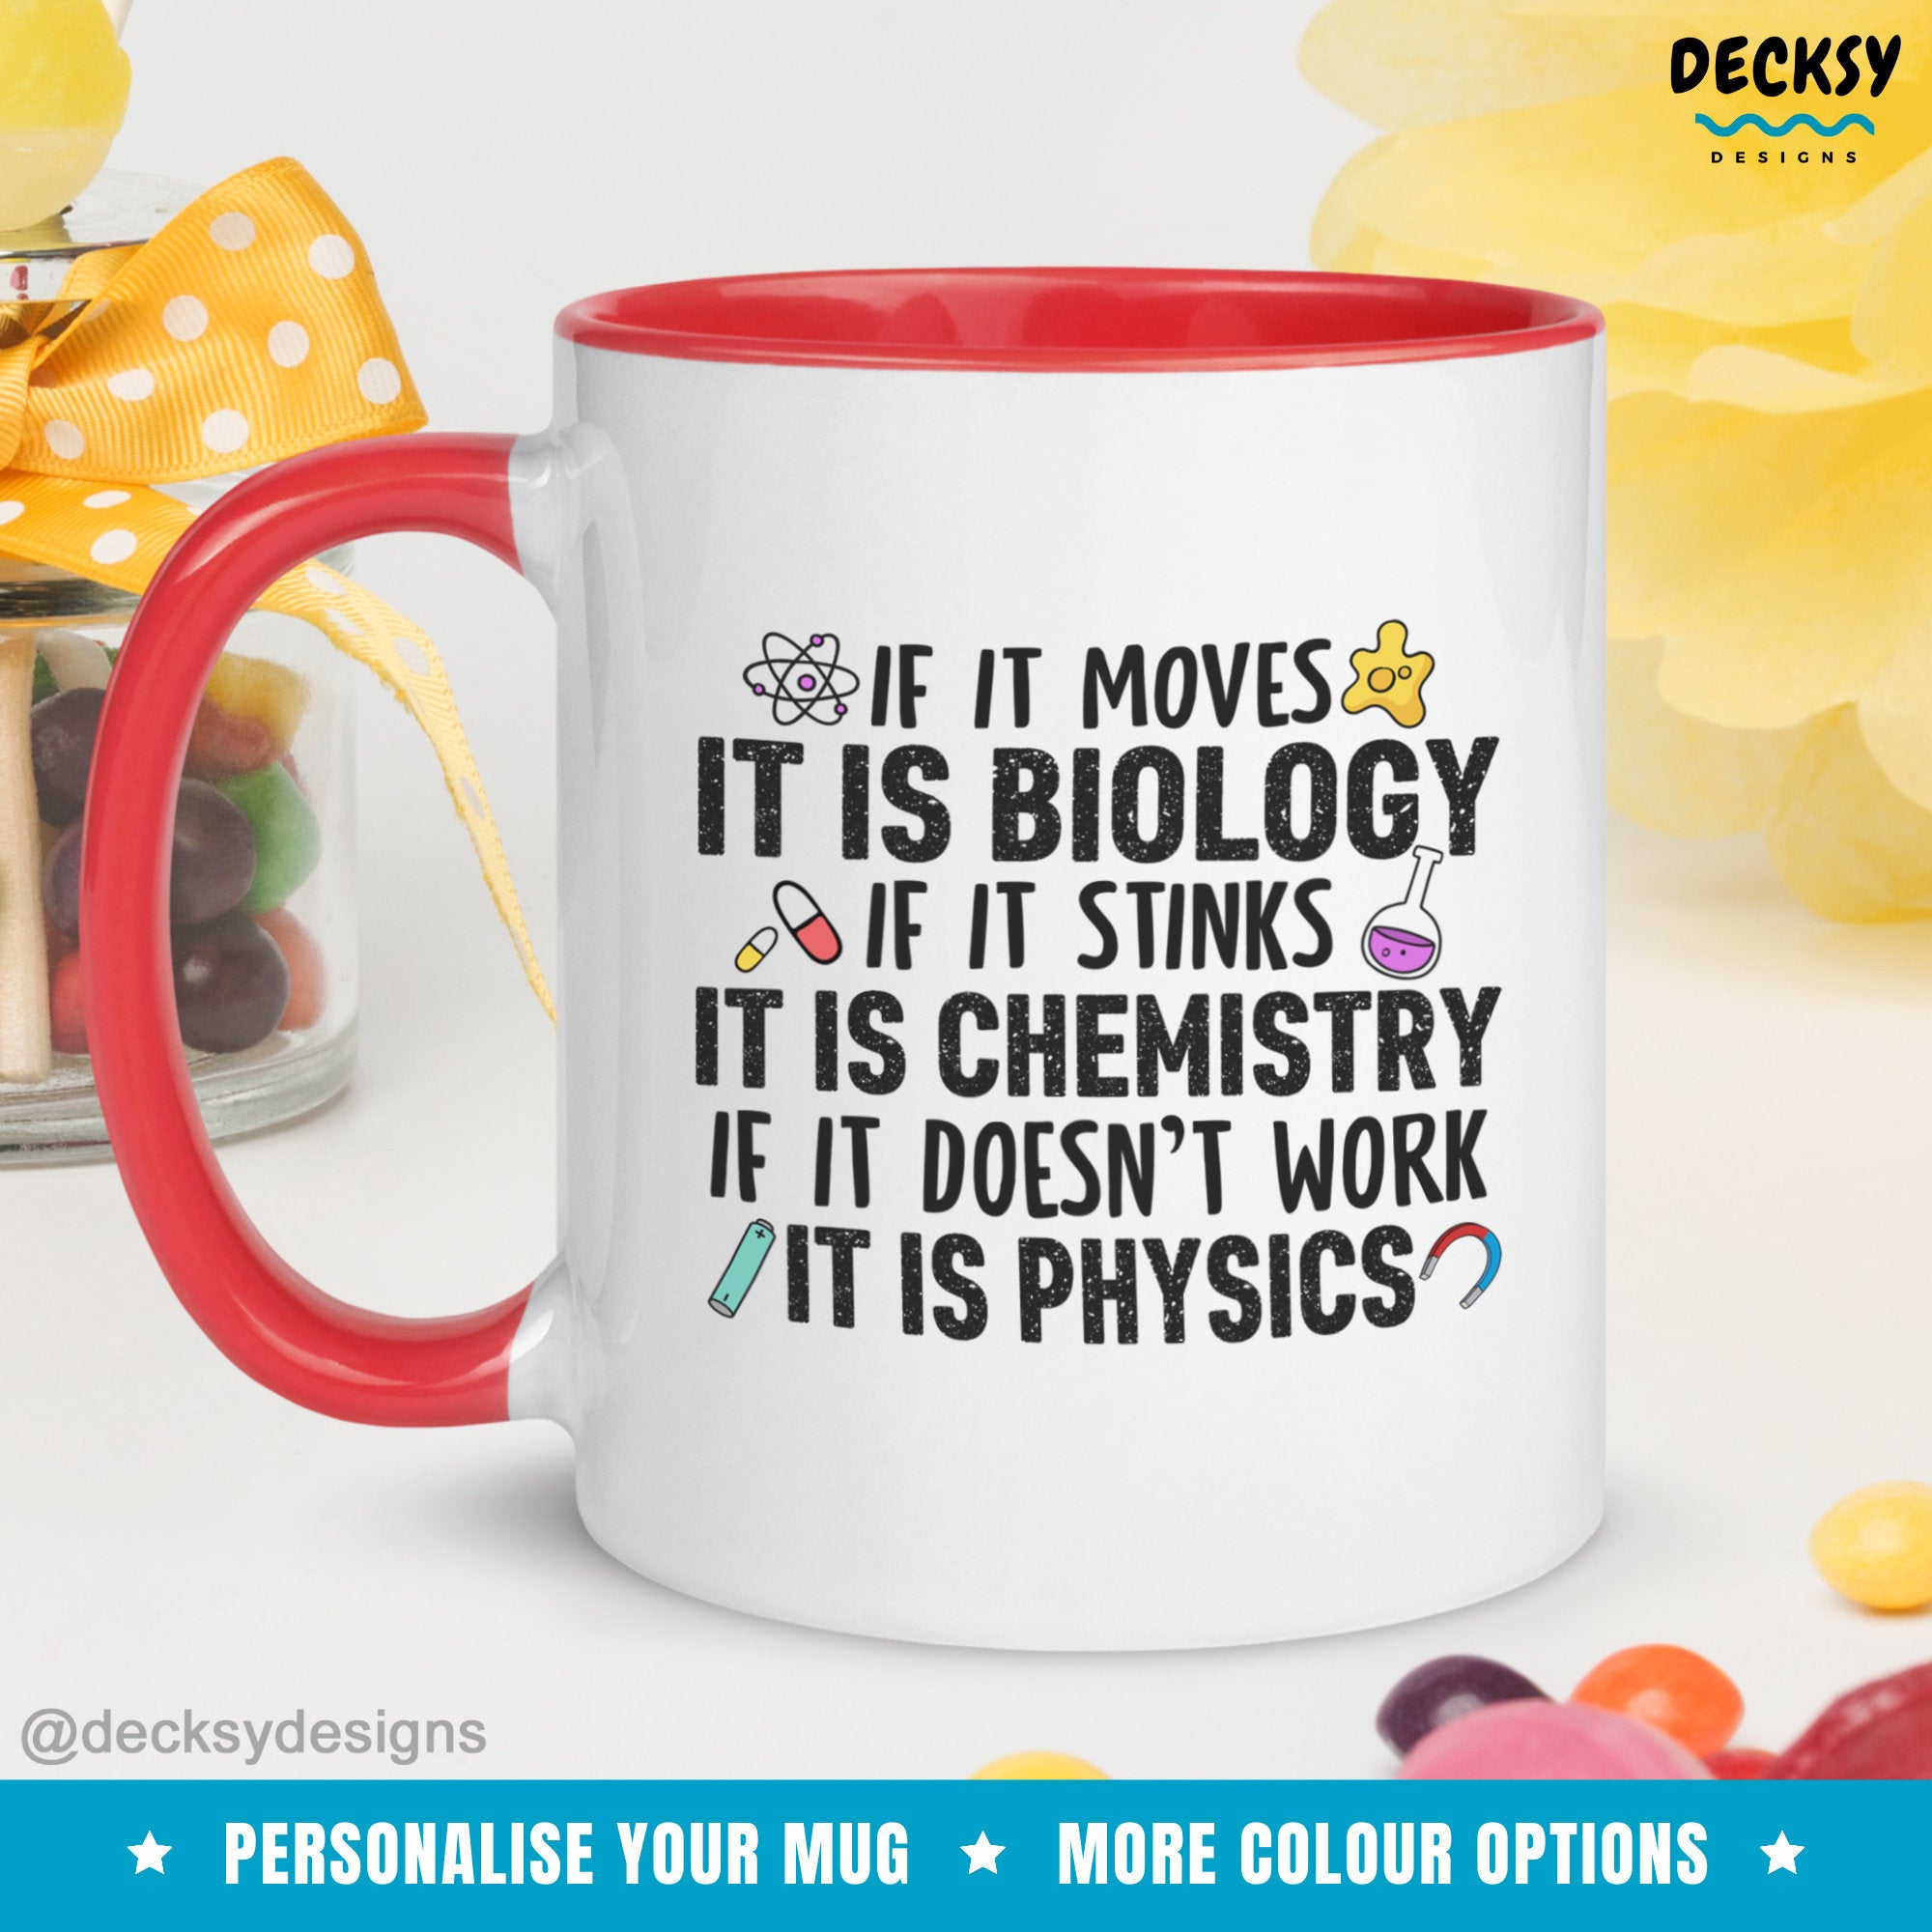 Funny Science Coffee Mug, Personalised Scientist Gift, School Physics Teacher Gift, Chemistry Teacher Cup, Biology Teacher Gift From Student Mugs by DecksyDesigns